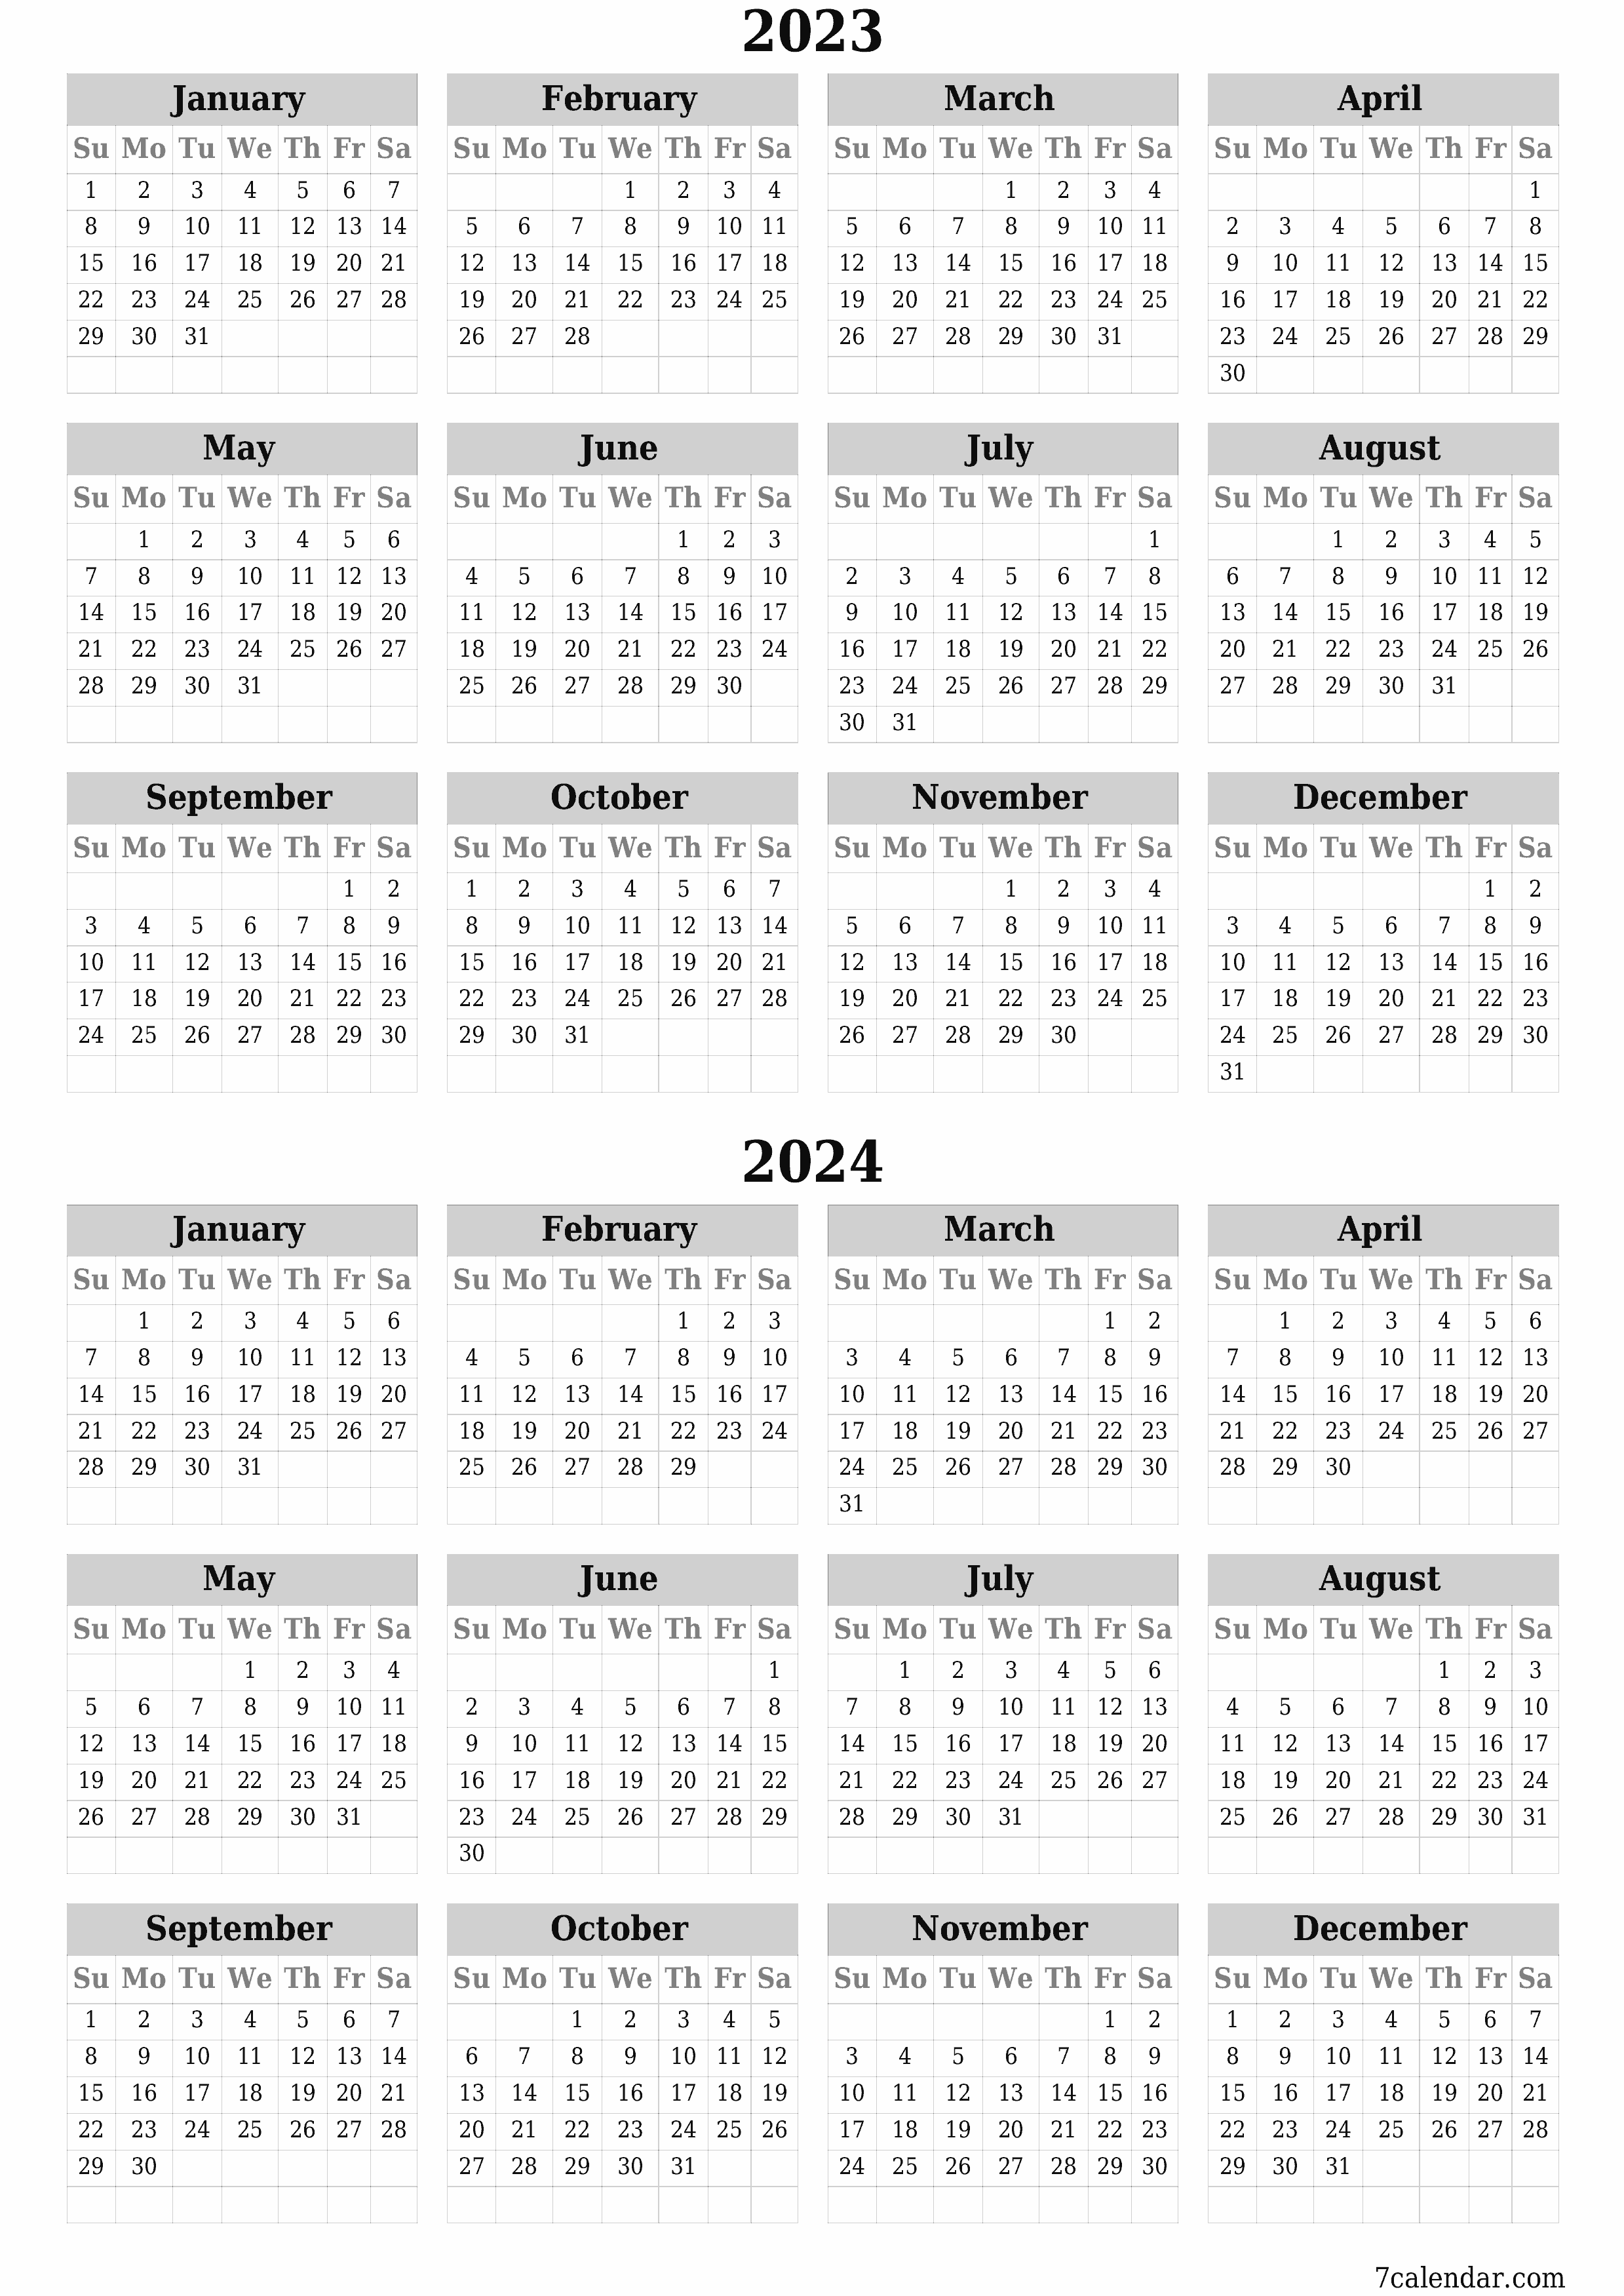 Blank yearly dated HD template image of calendar for year 2023, 2024 save and print to PDF PNG English - 7calendar.com